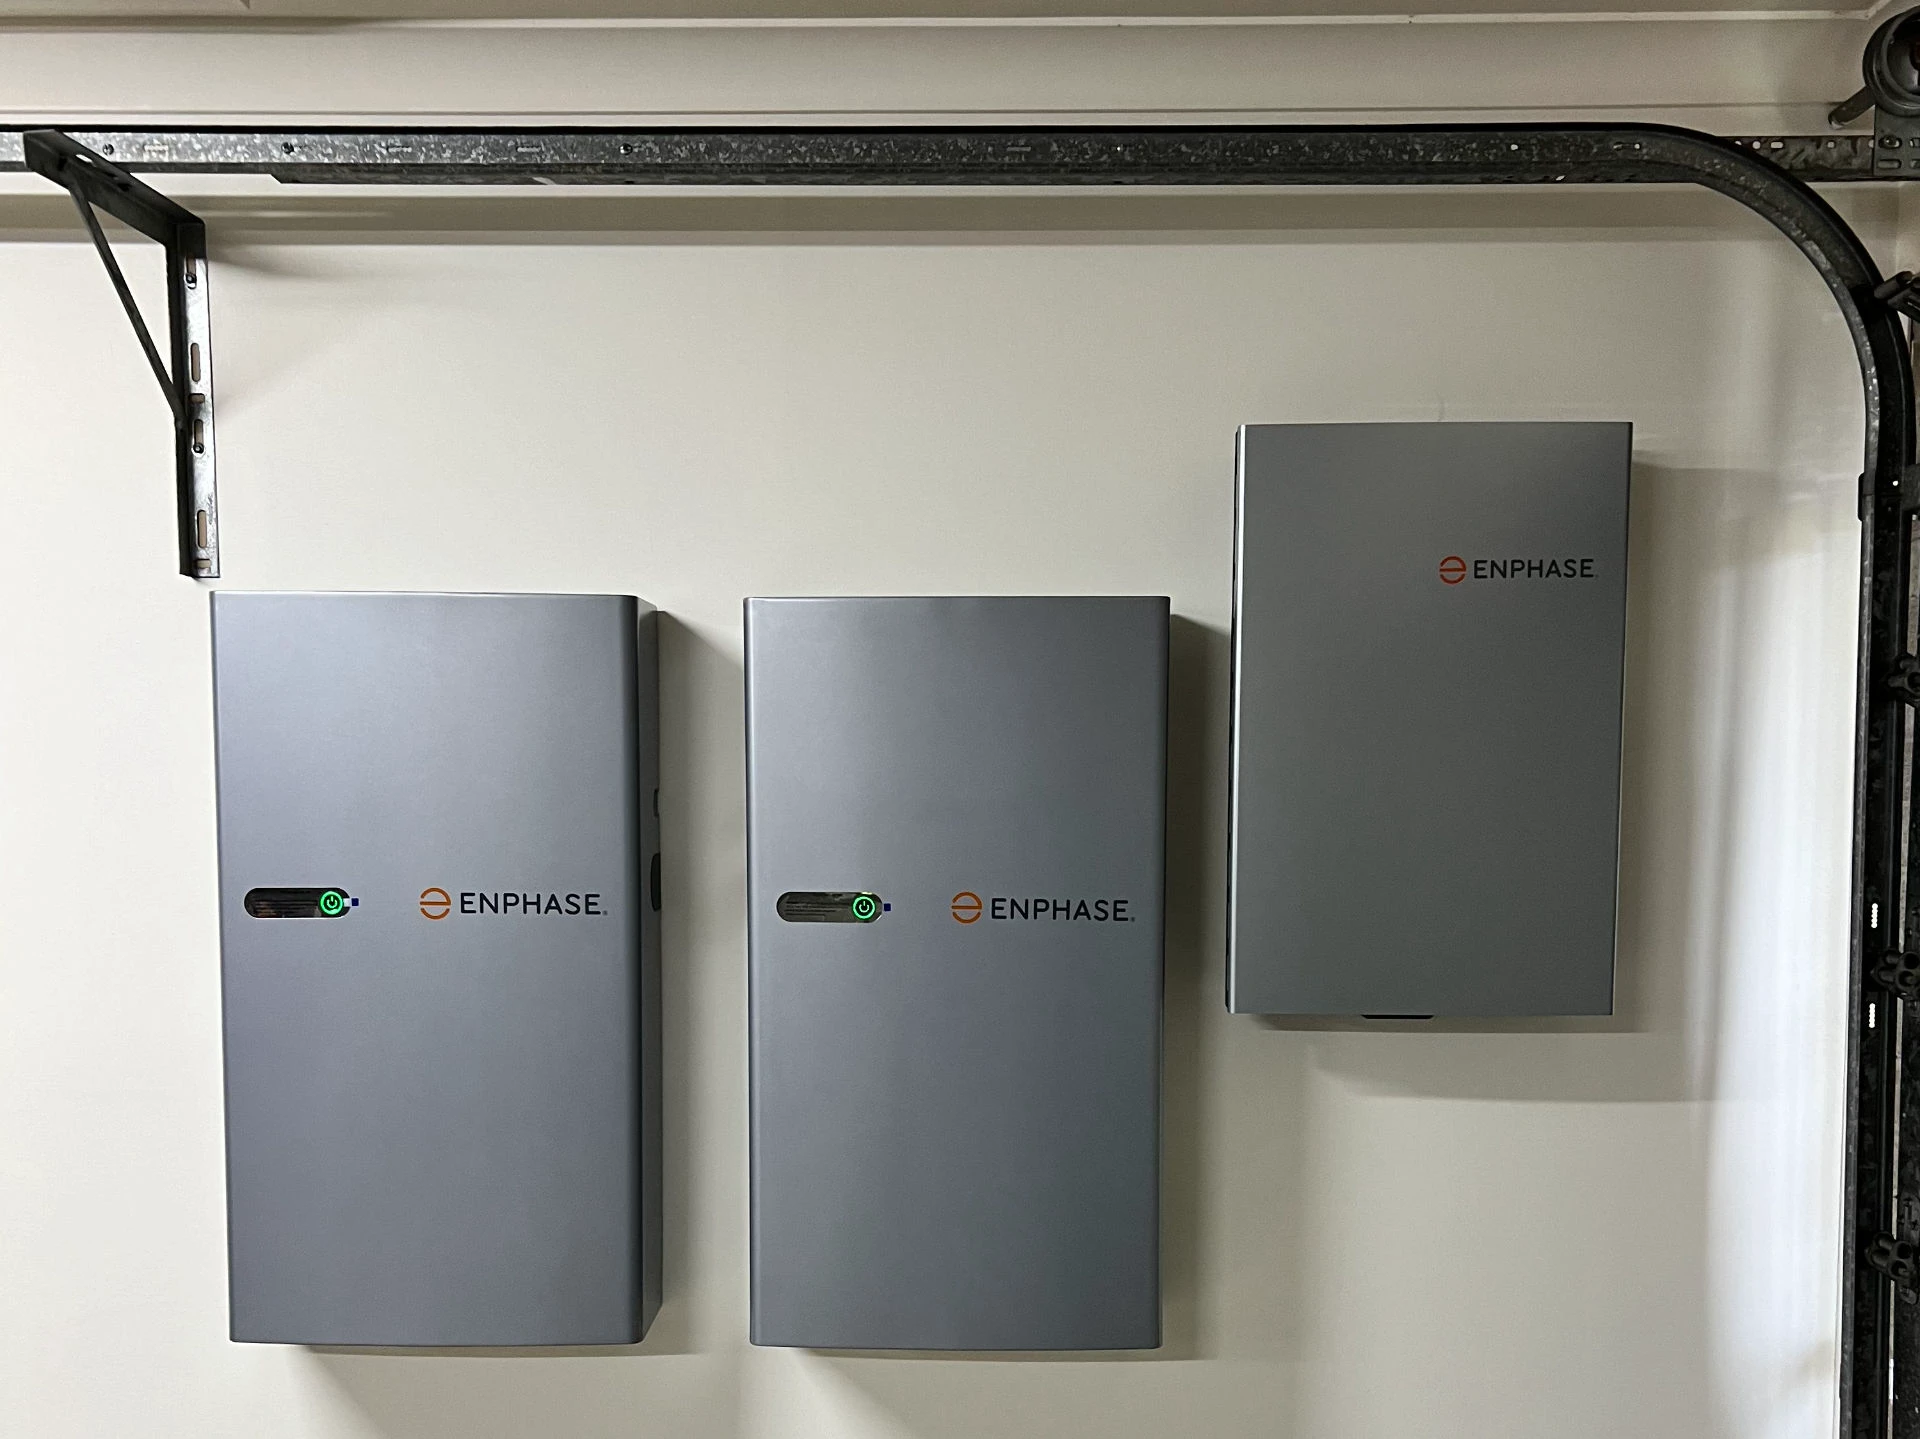 Enphase IQ Battery 5P installed on interior garage wall